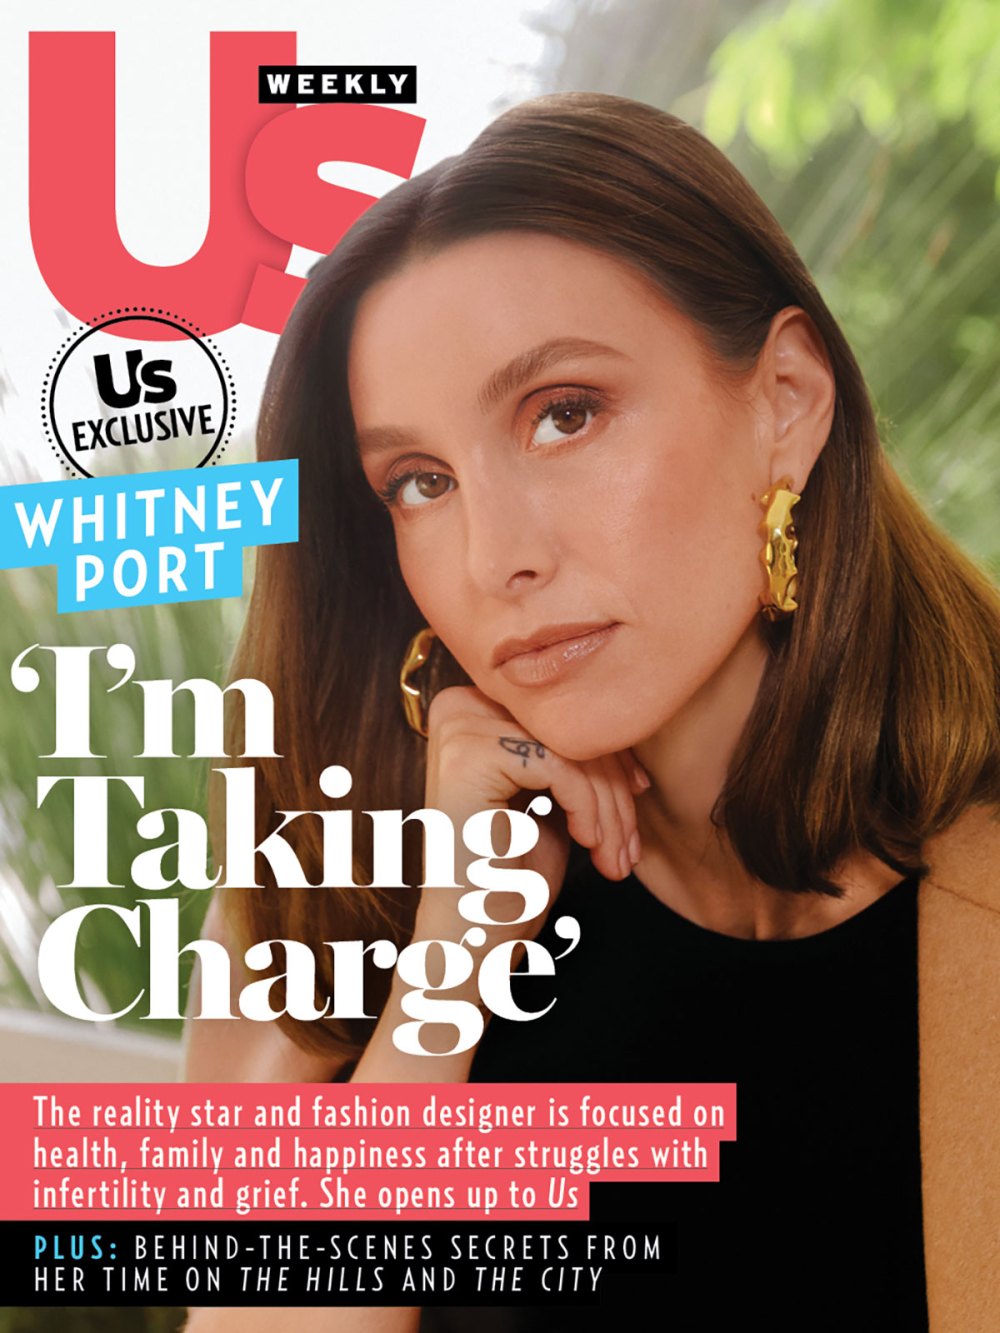 Cover Image Whitney Port Us Weekly Cover Story 2343 No Chip